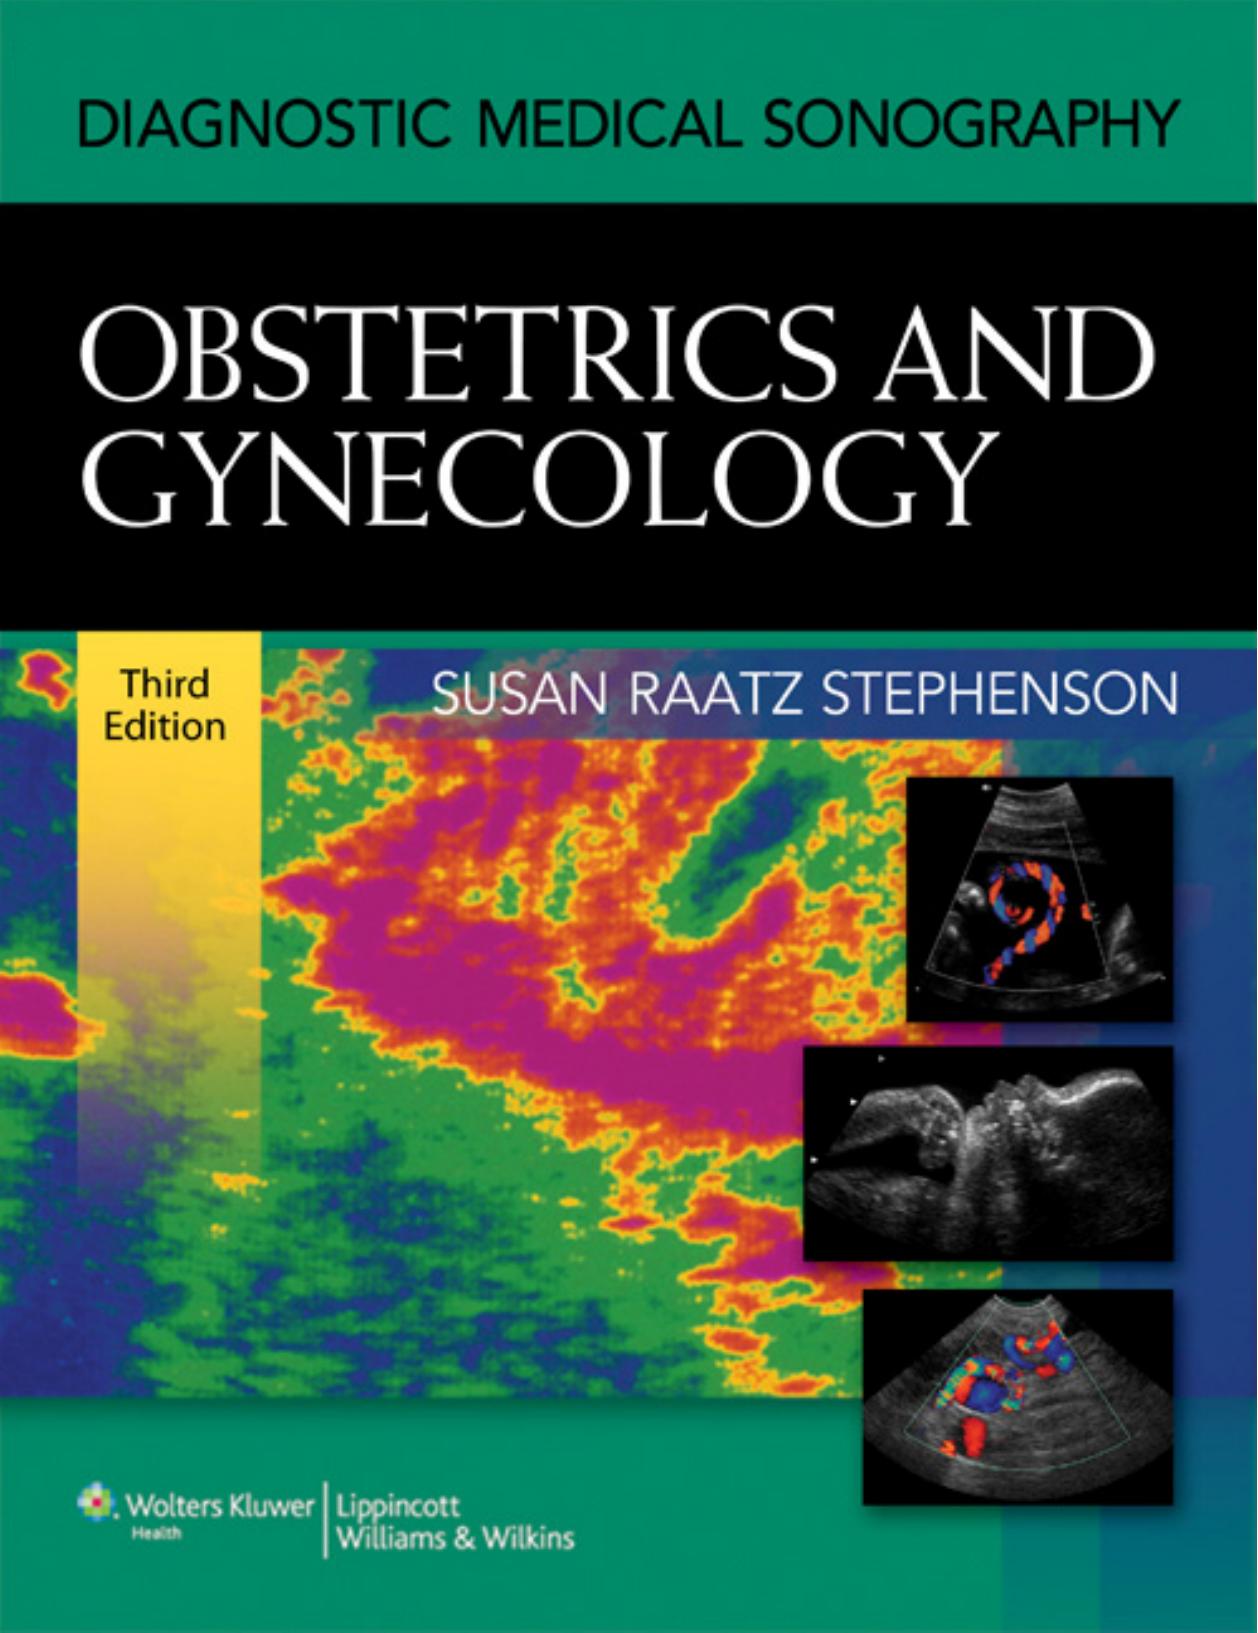 DIAGNOSTIC MEDICAL SONOGRAPHY: OBSTETRICS AND GYNECOLOGY, Third Edition